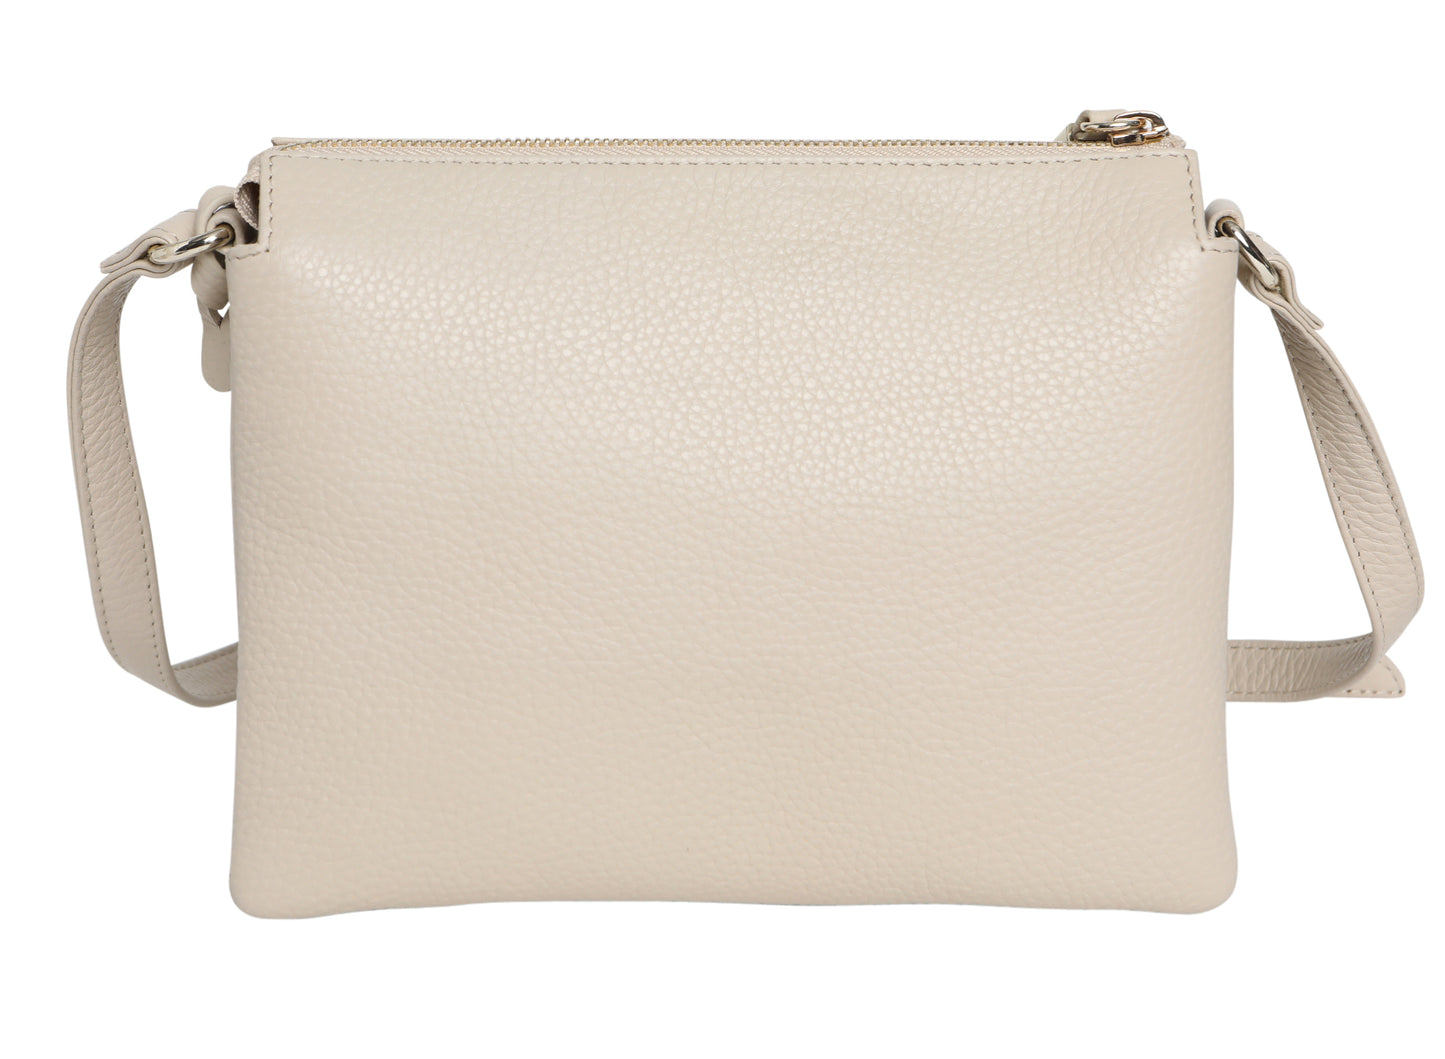 Modapelle - Cow Leather Multi Compartment Cross Body Bag in Ivory | Moda6711